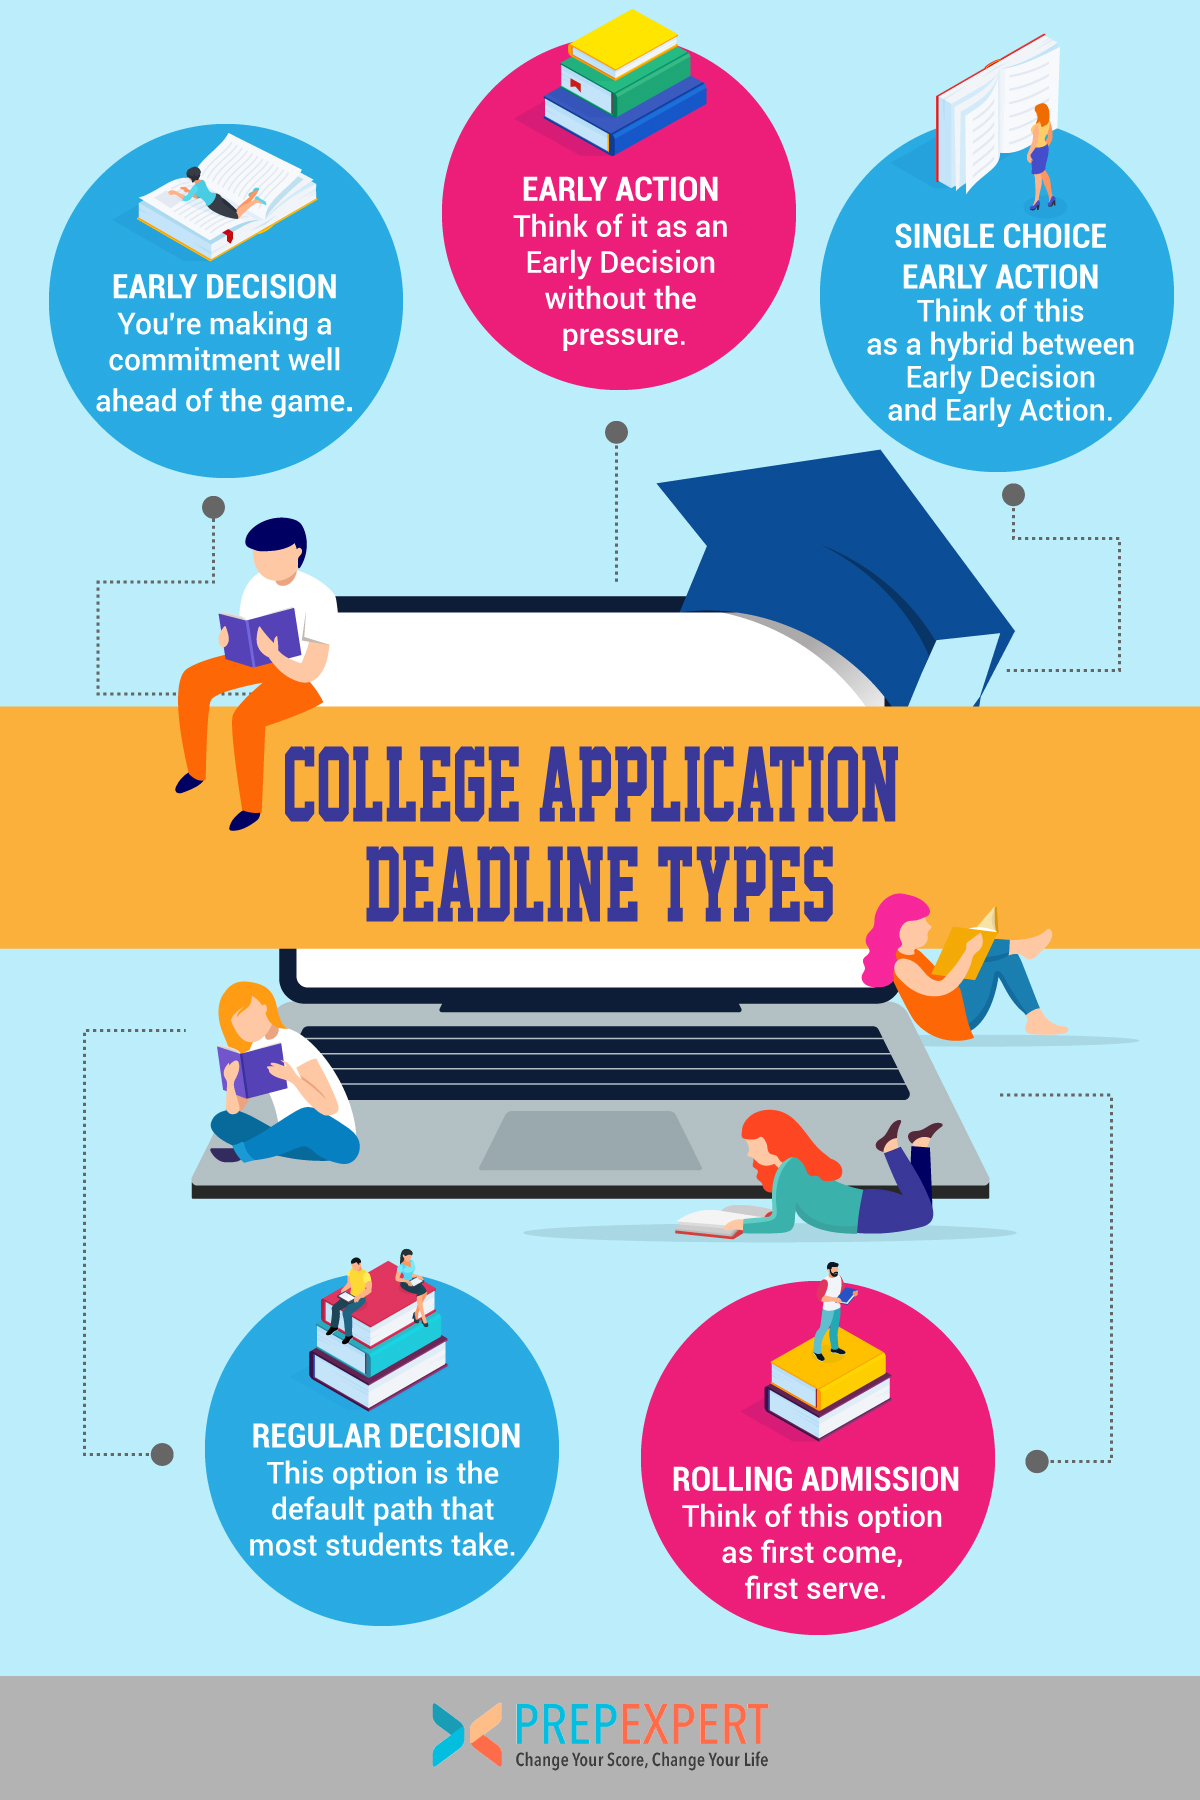 When Do College Admission Deadlines Close? A Handy Guide